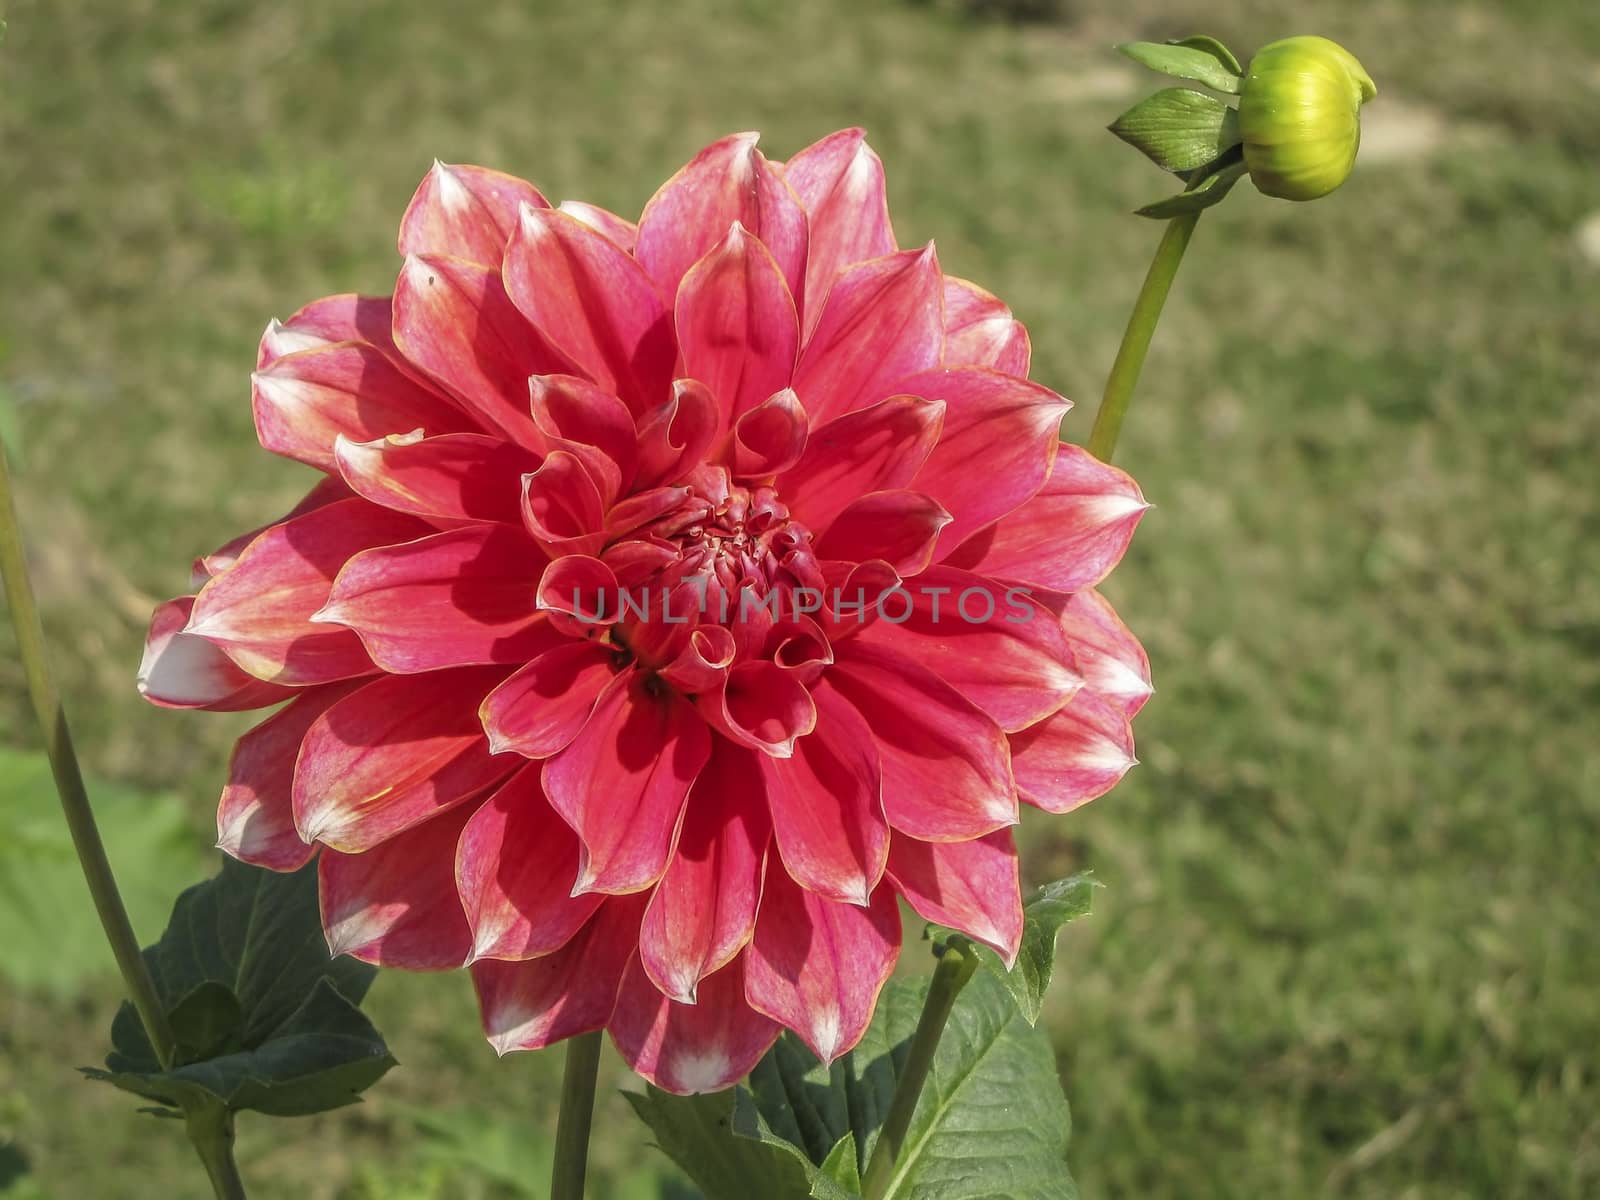 Isolated pink Dahlia flower shinning in Sunlight. 
Dahlia is a genus of bushy, tuberous, herbaceous perennial plants native to Mexico and Central America. A member of the Asteraceae family of dicotyledonous plants.